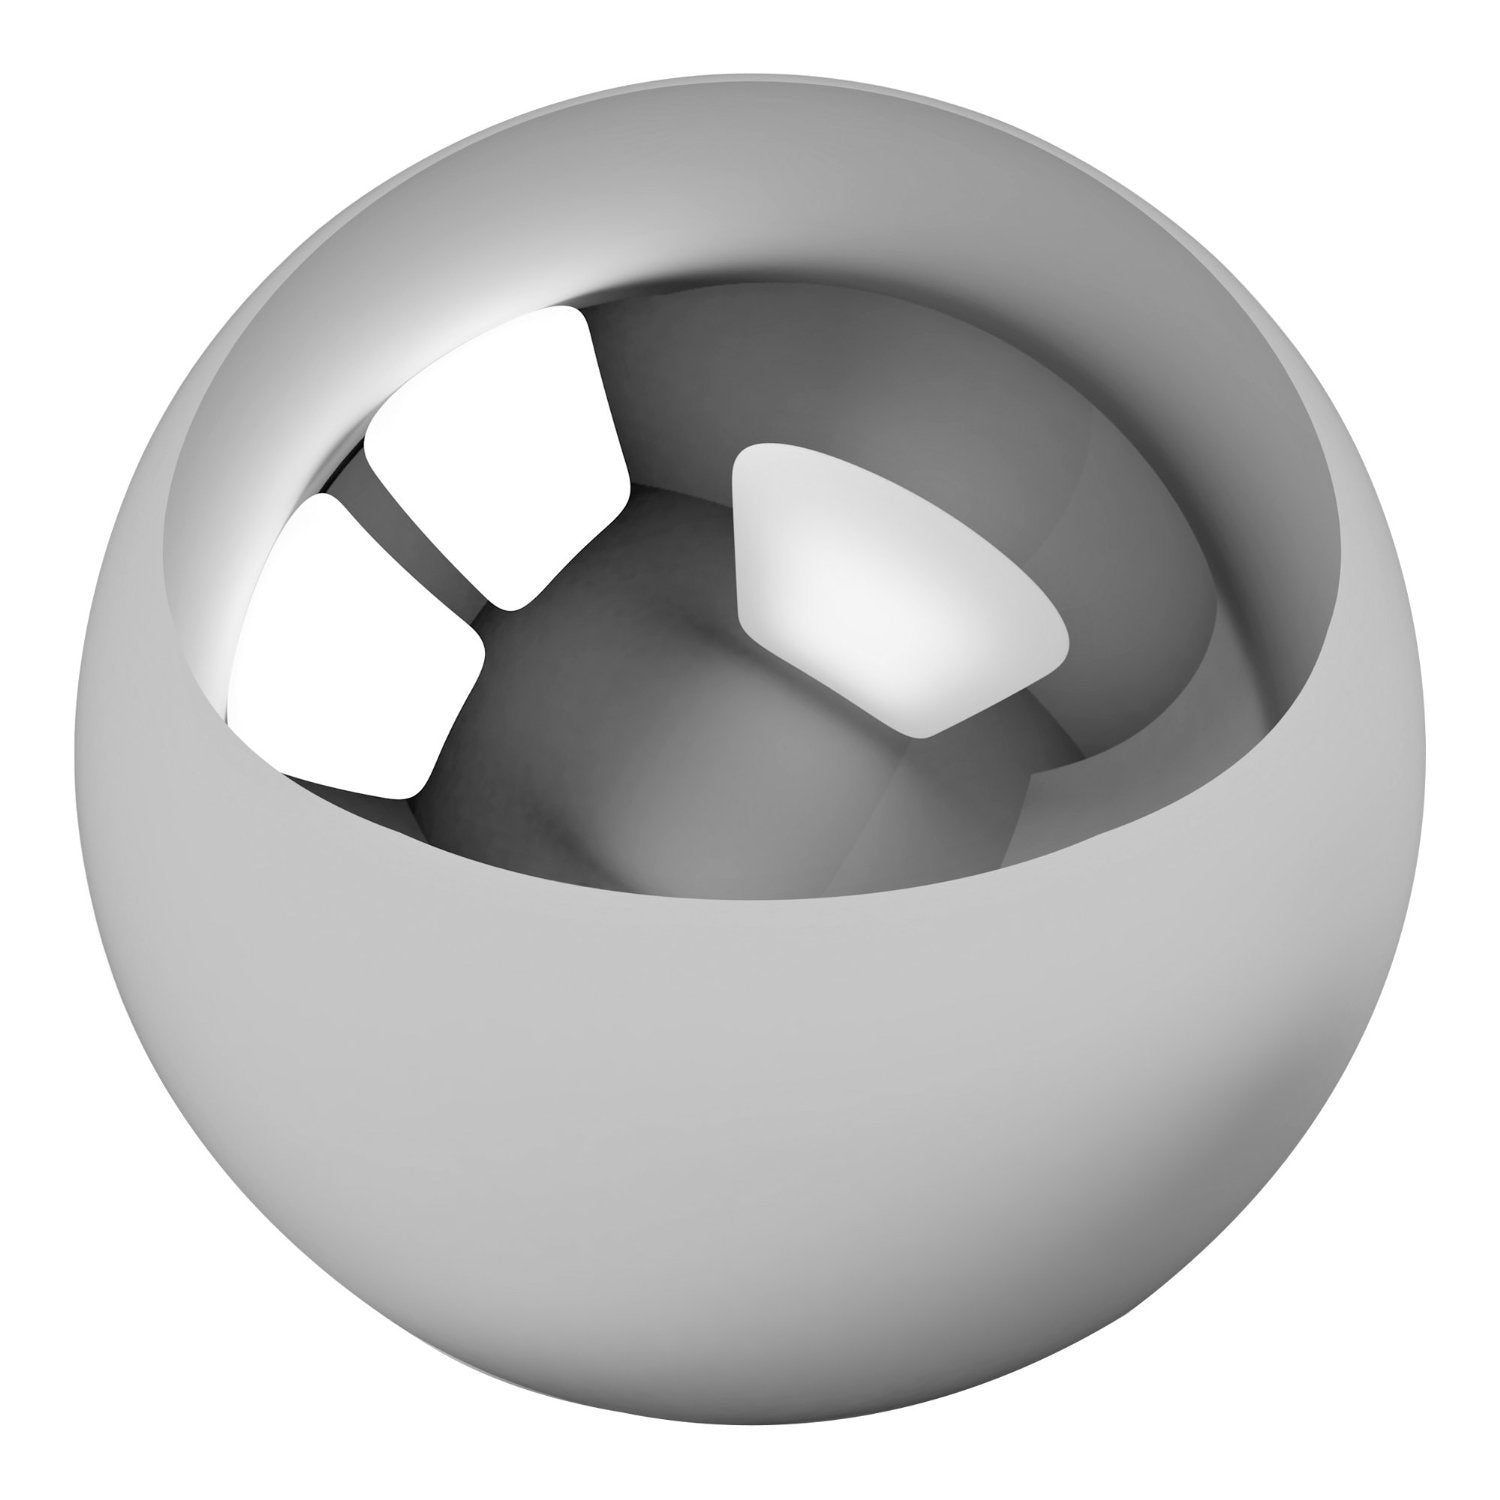 Stainless steel ball 3.969 mm